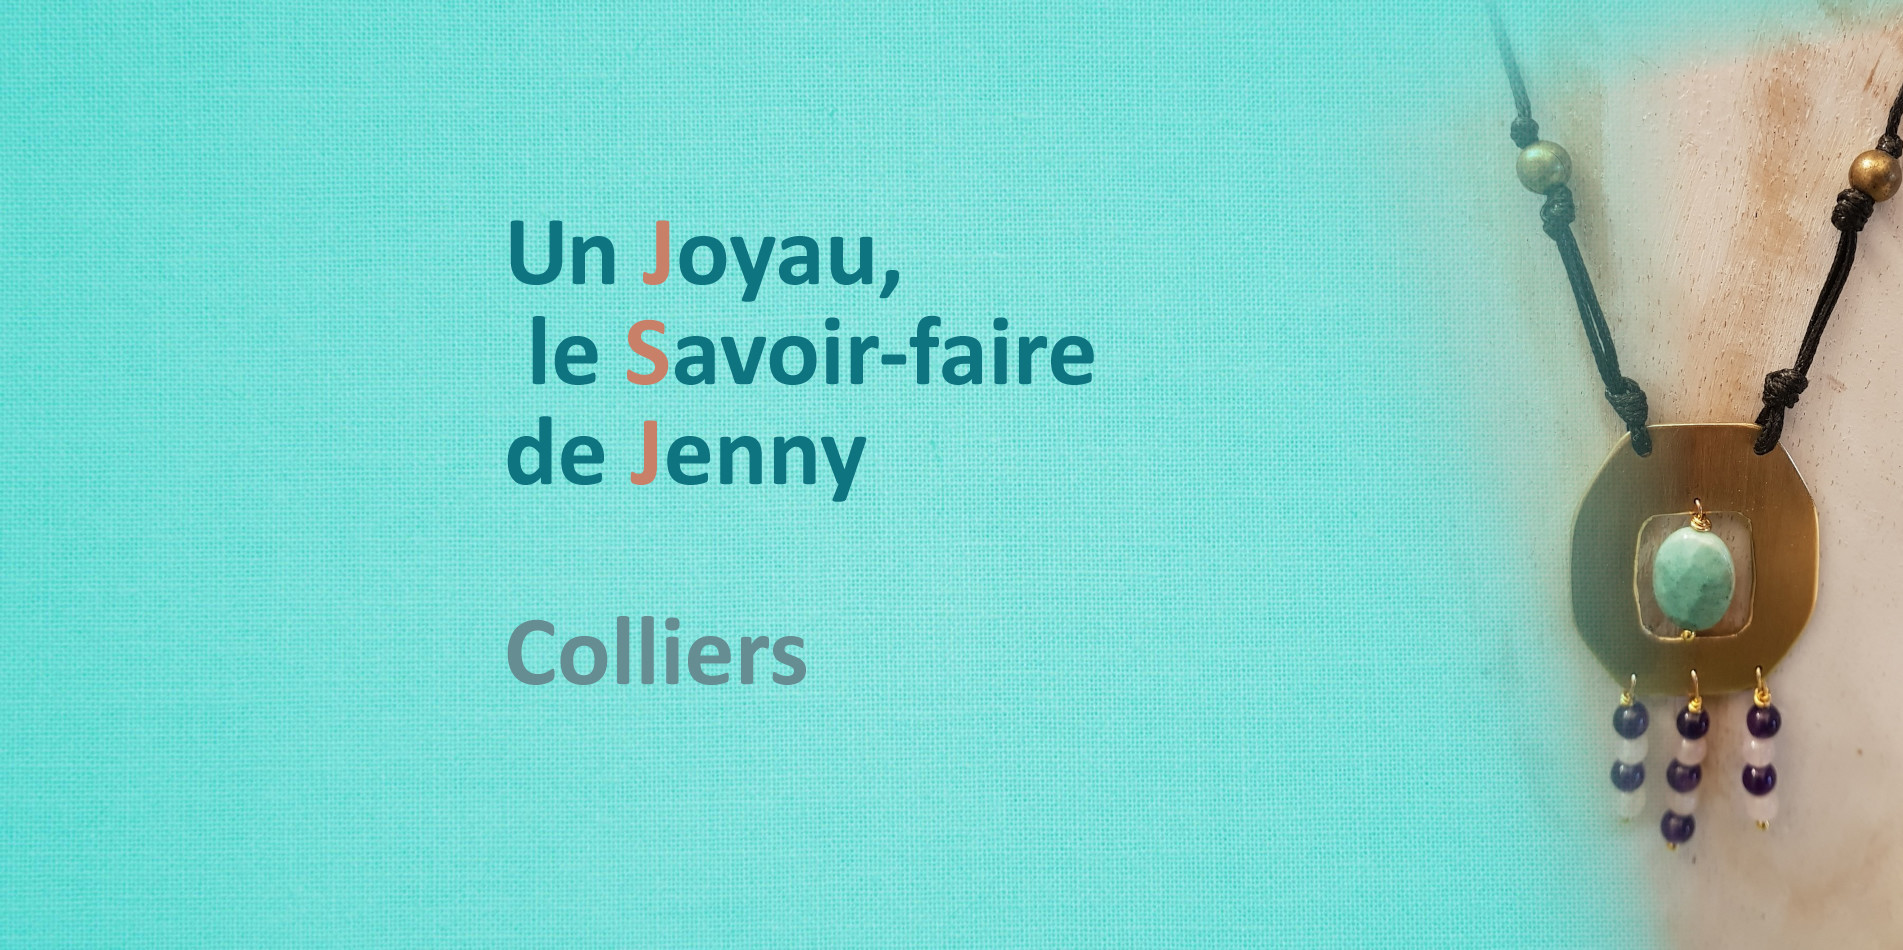 Colliers